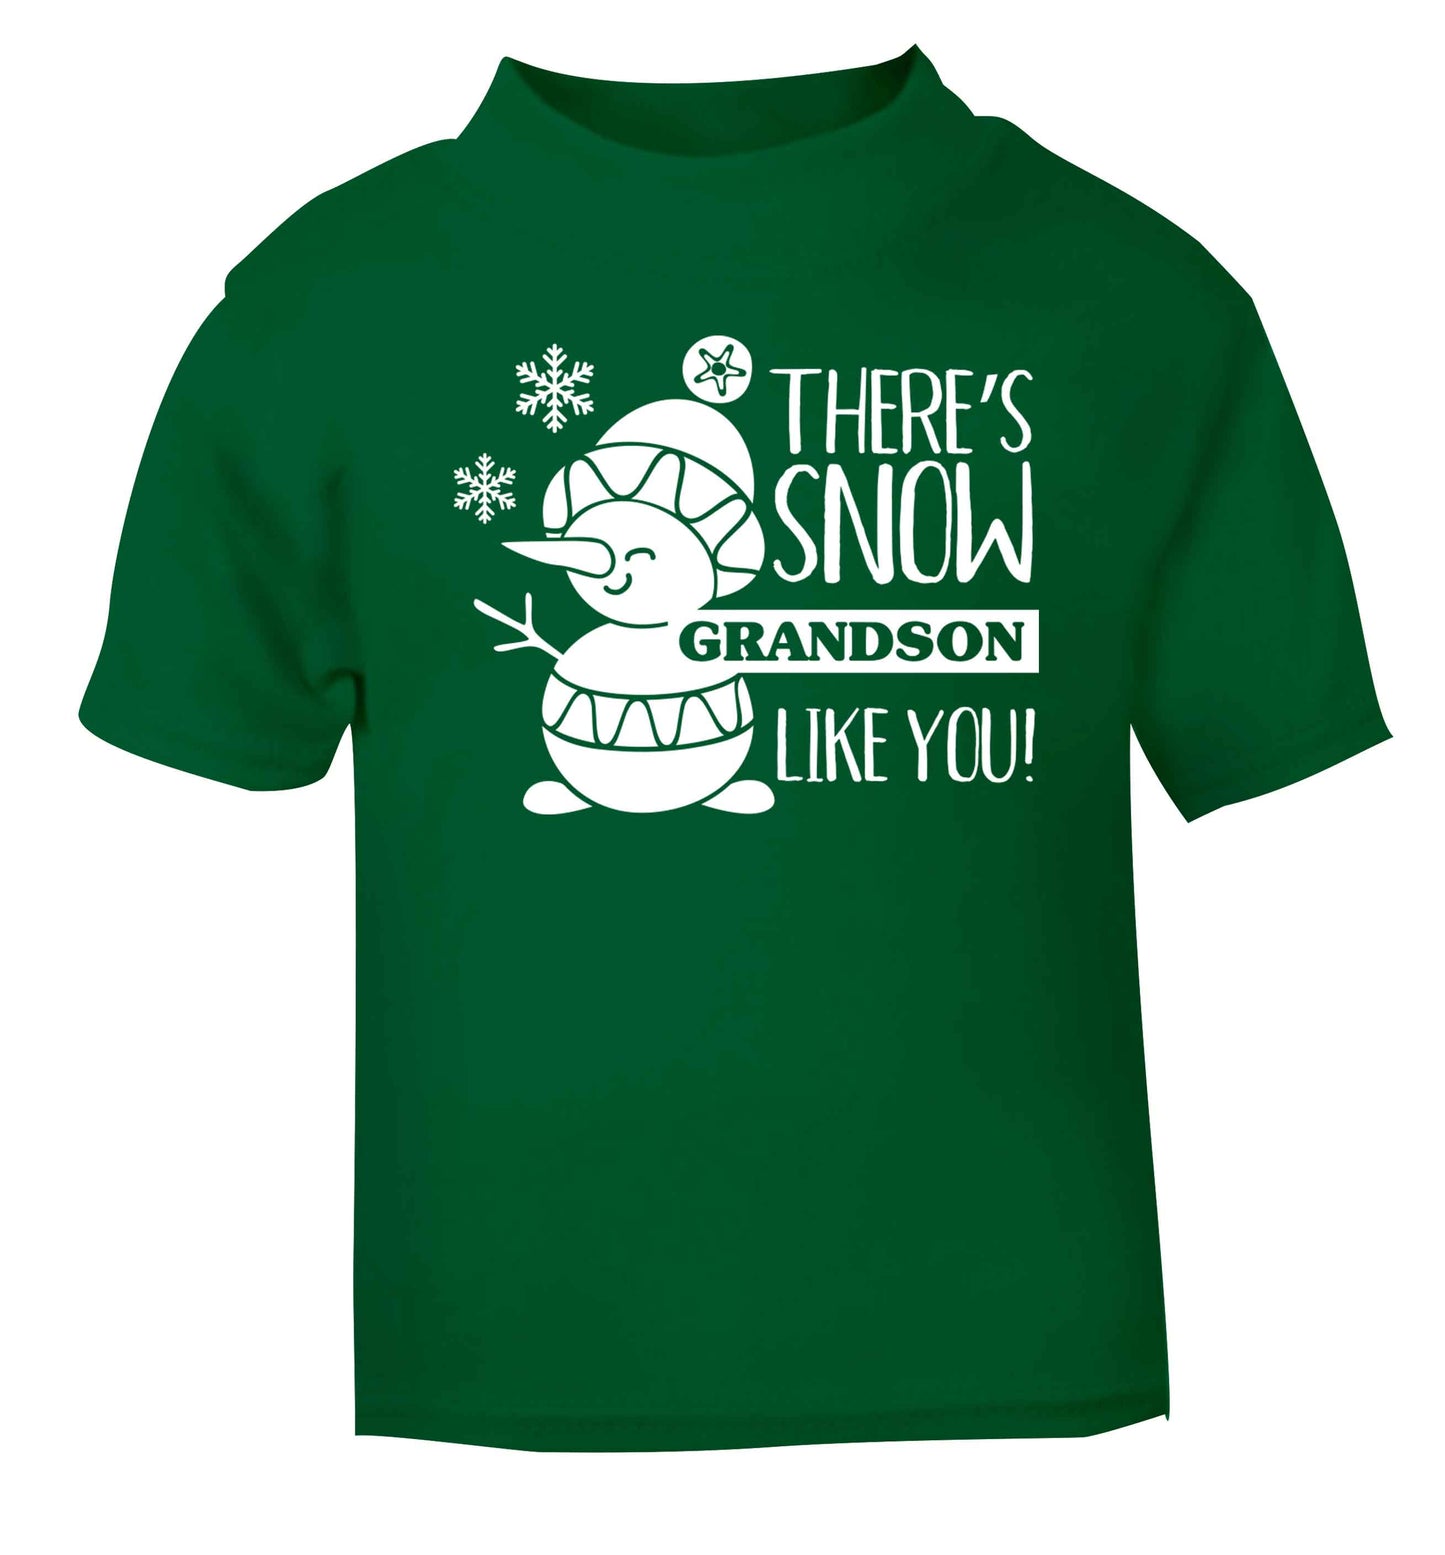 There's snow grandson like you green baby toddler Tshirt 2 Years